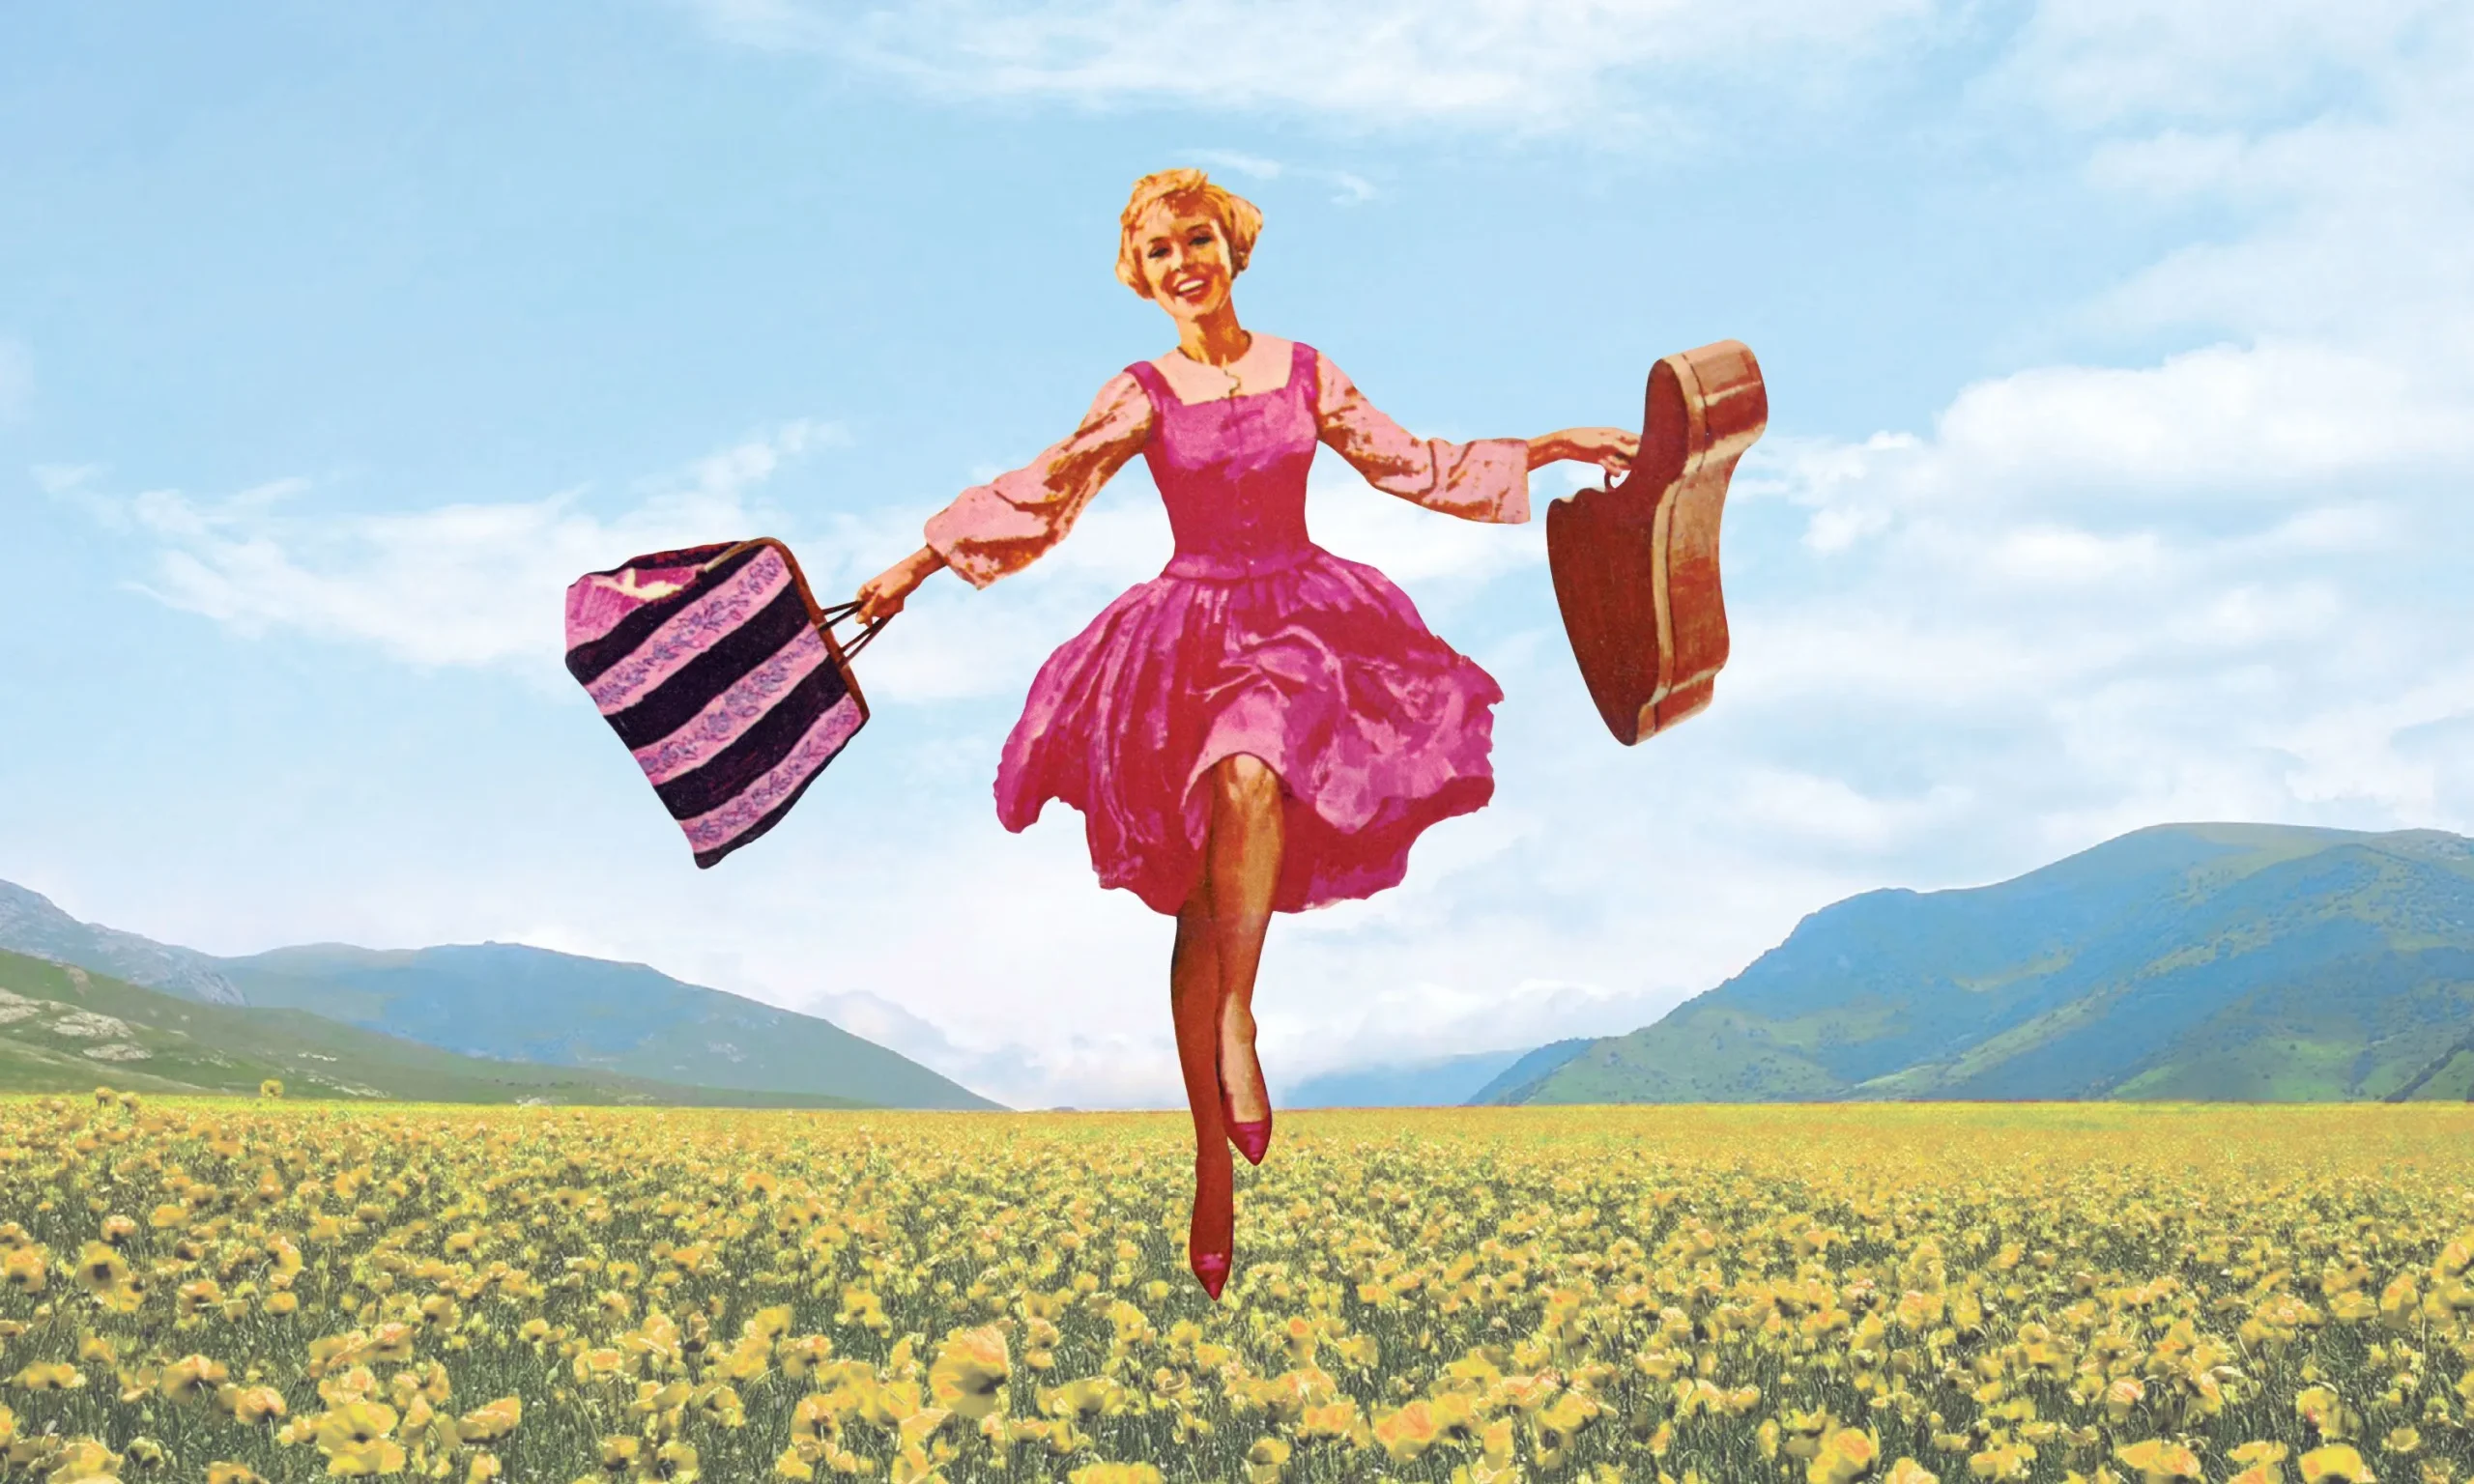 "The Sound of Music" – An Enduring Classic Removed from Disney+